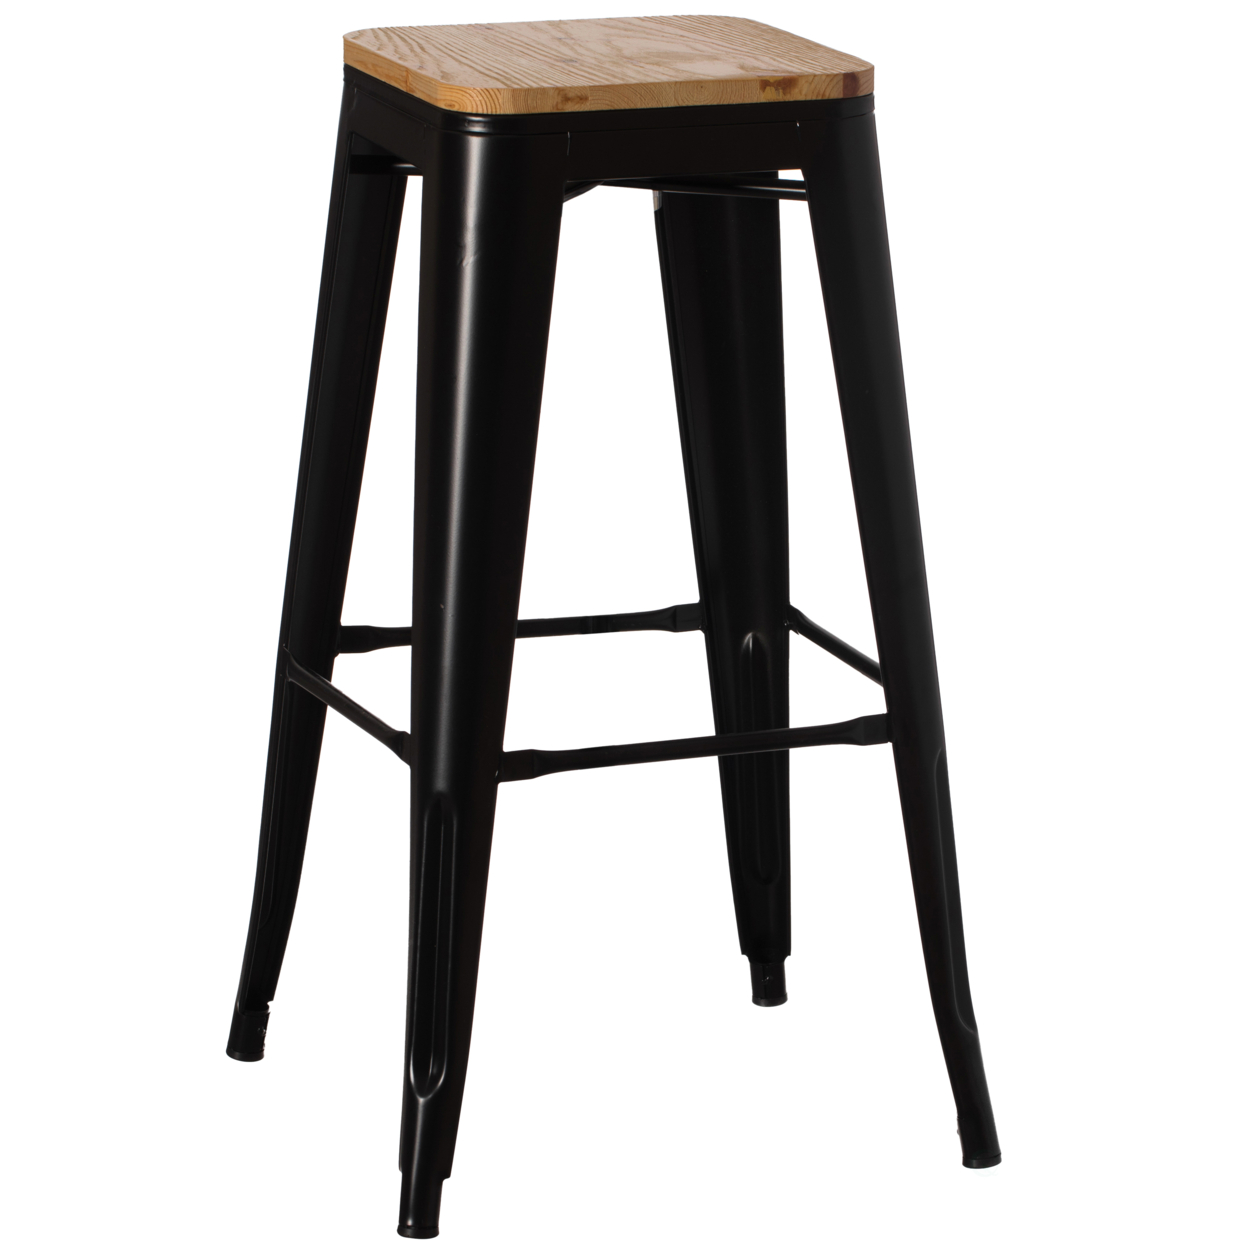 Decorative Accent Bar Stool For Indoor And Outdoor, Wooden Brown And Metal Black - Large